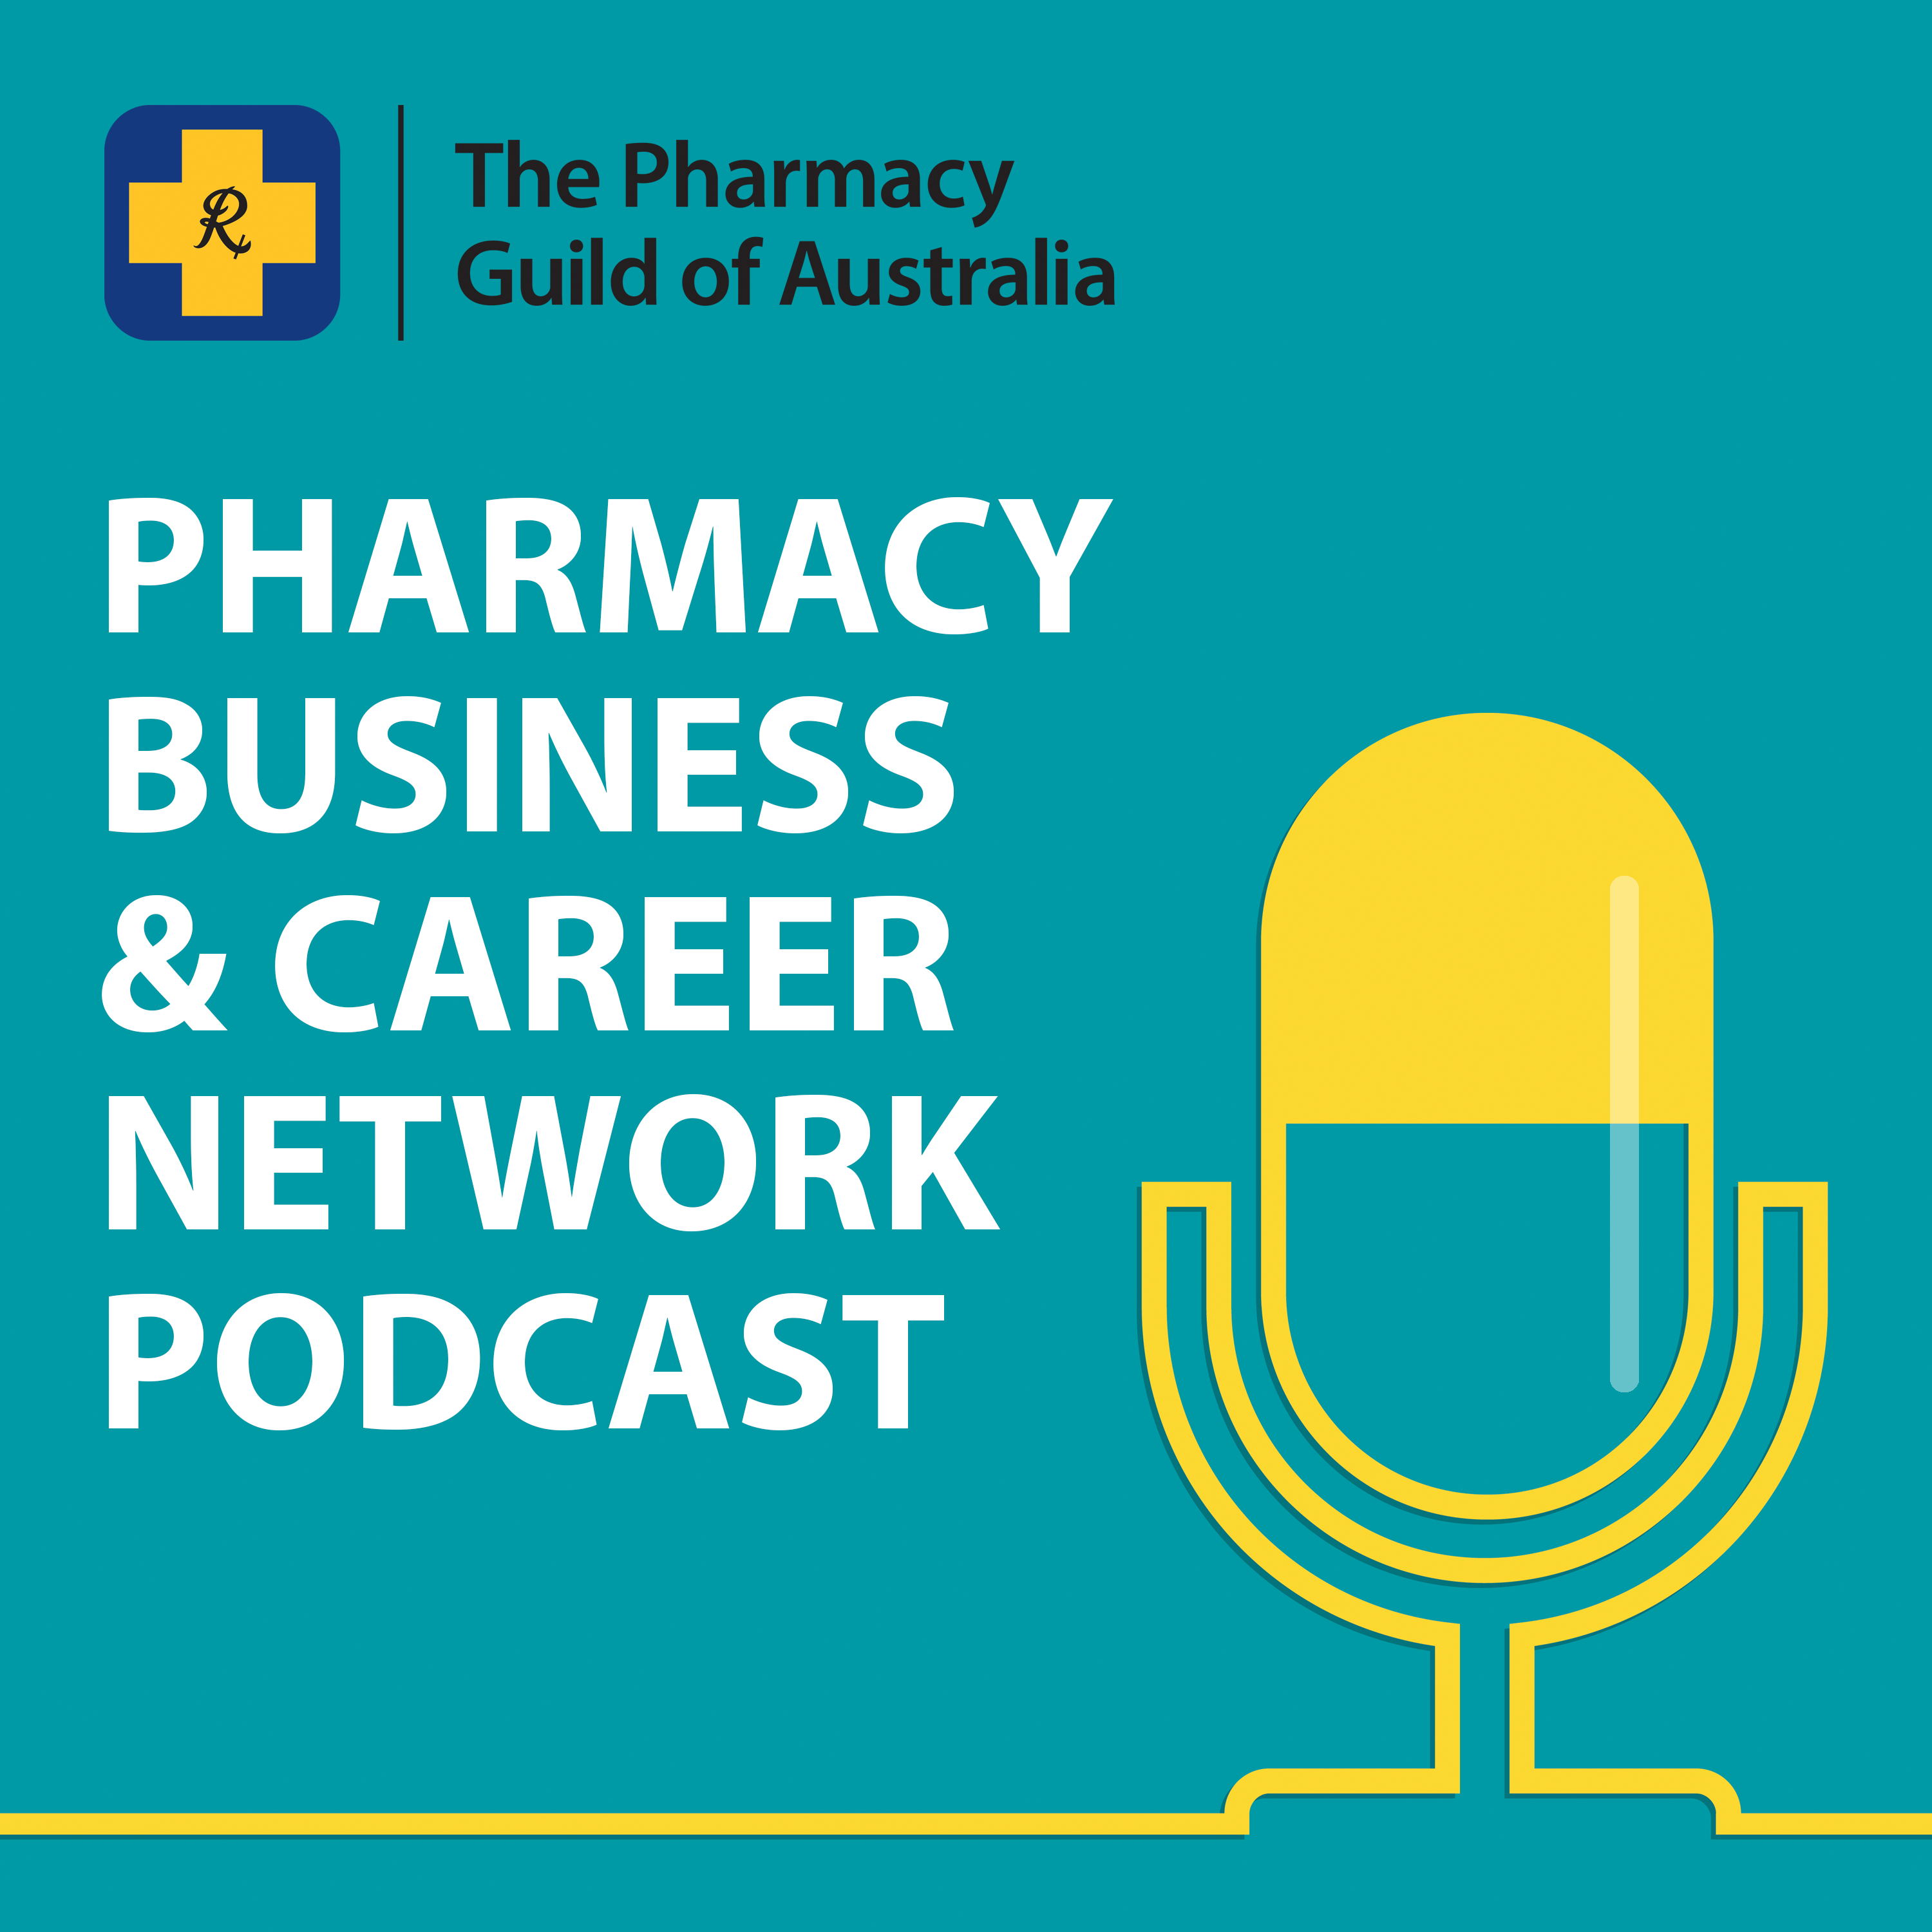 Compounding - Where Innovation Meets Patient-centered Care - Jack Hammond - Ep 134